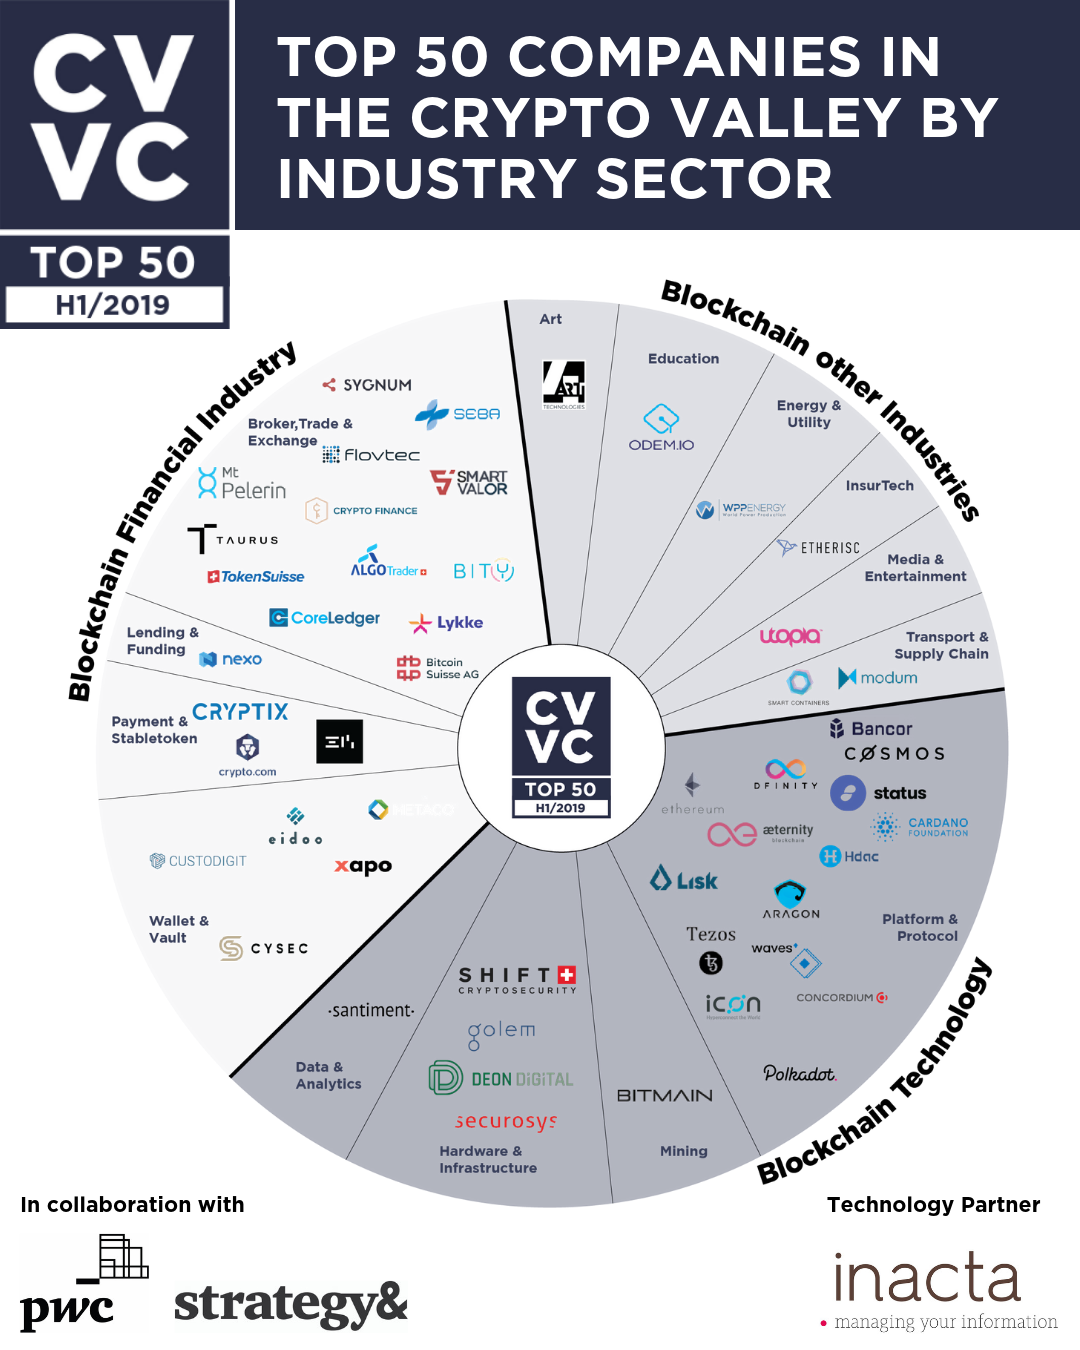 New CV VC Top 50 Report Shows: Summer in Crypto Valley is back